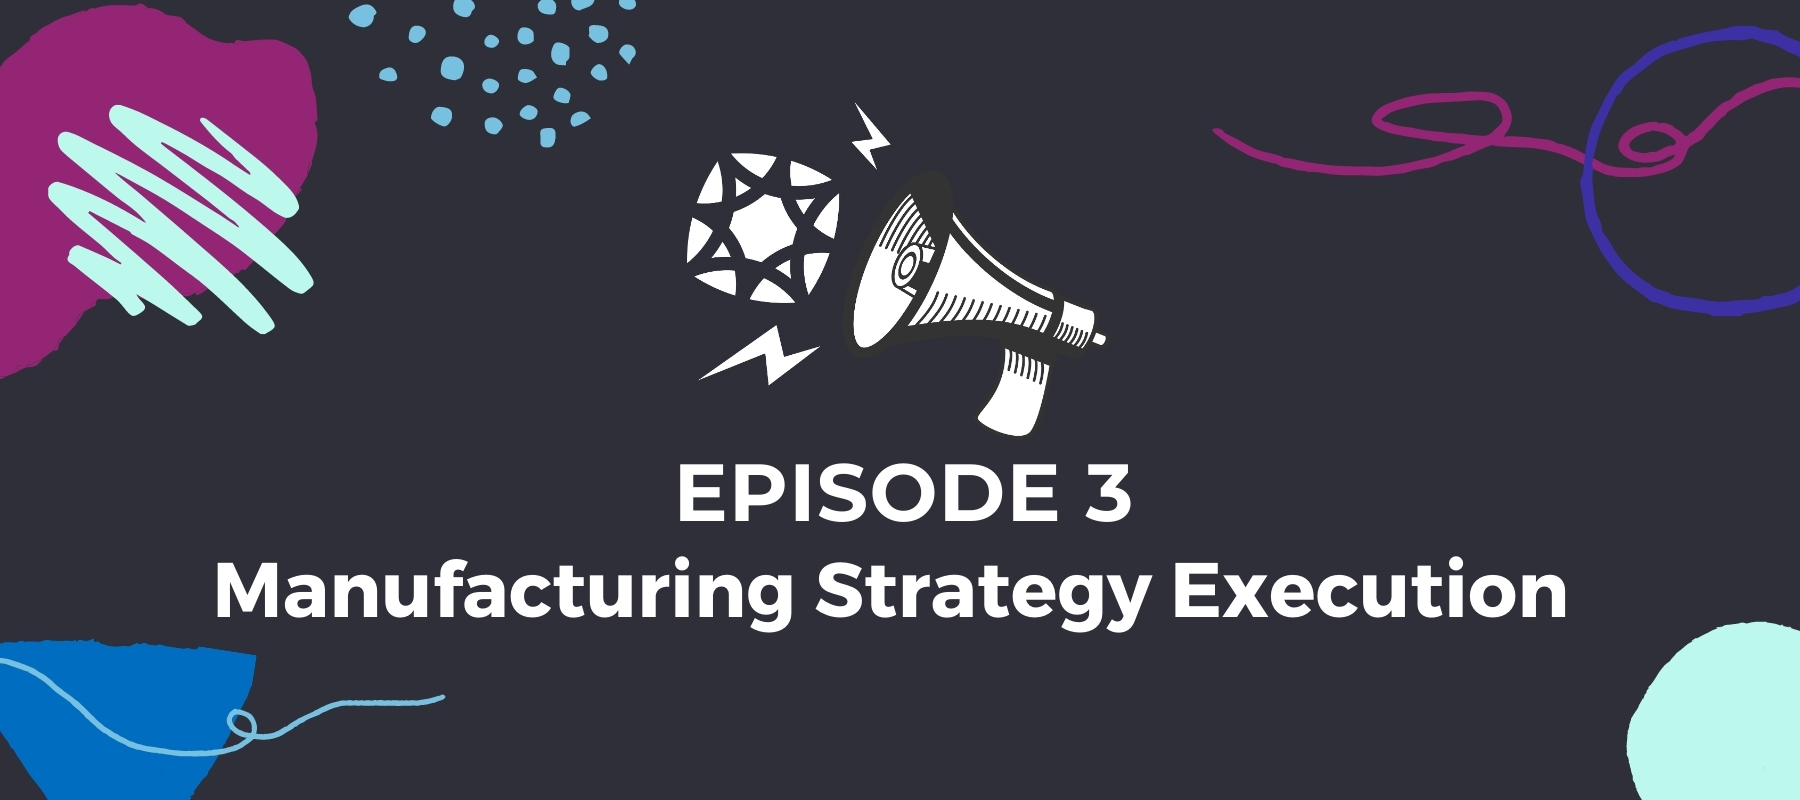 Episode 3: Manufacturing Strategy Execution